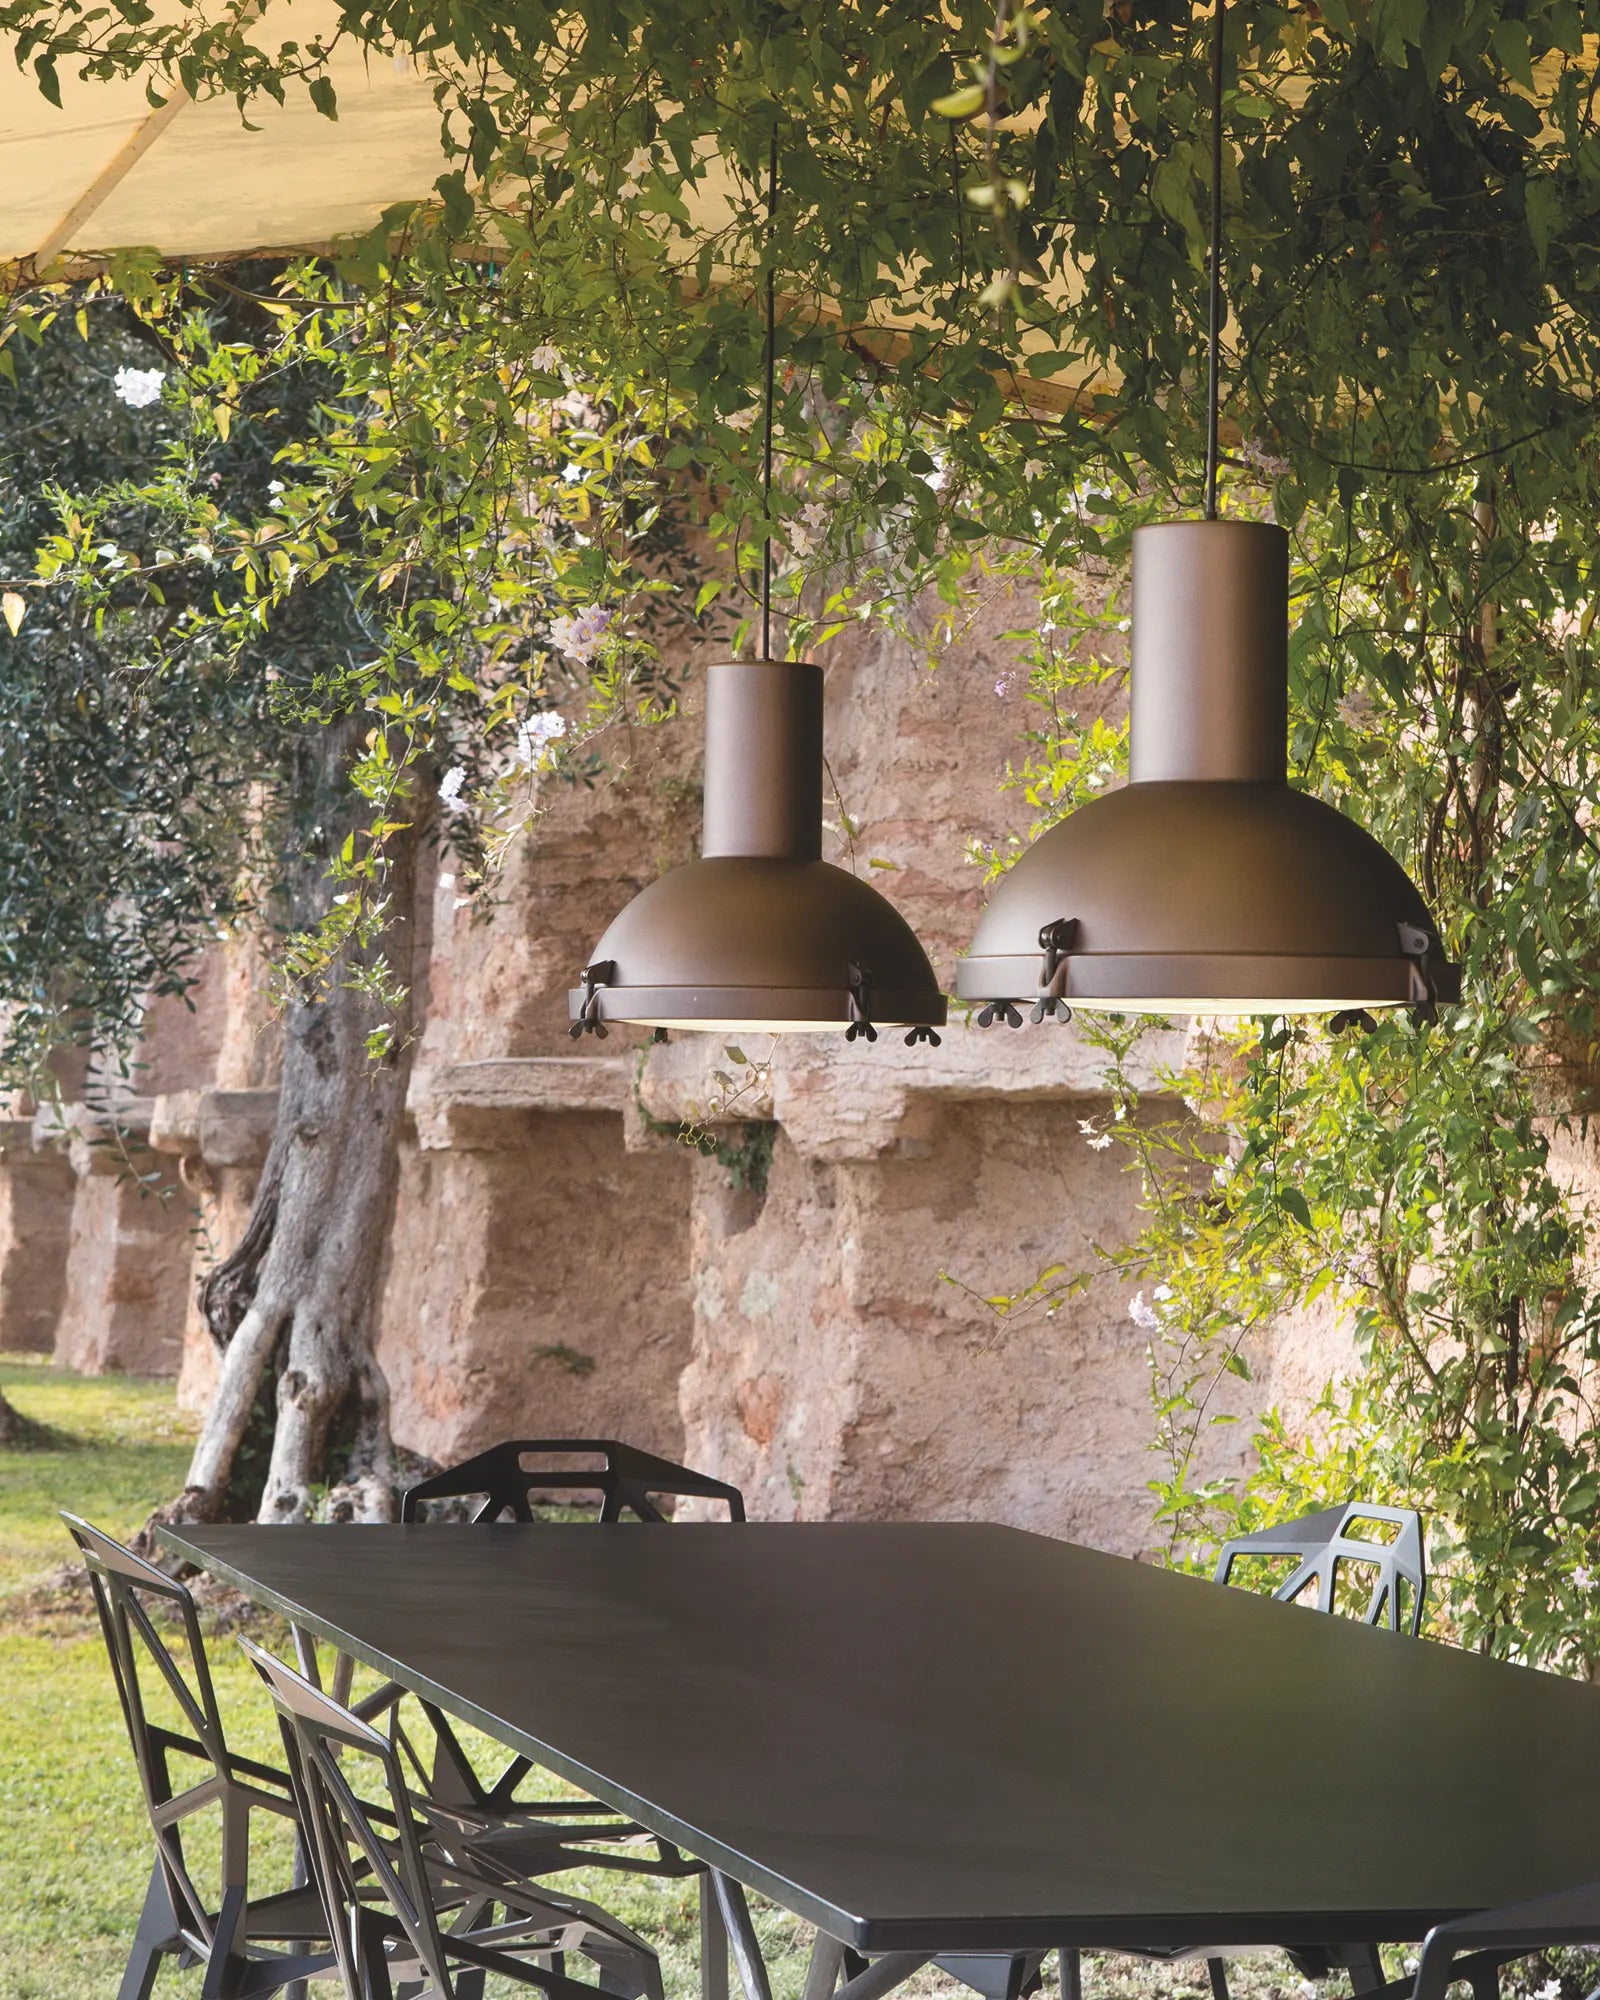 Projecteur classic iconic pendant light cluster above an outdoor table